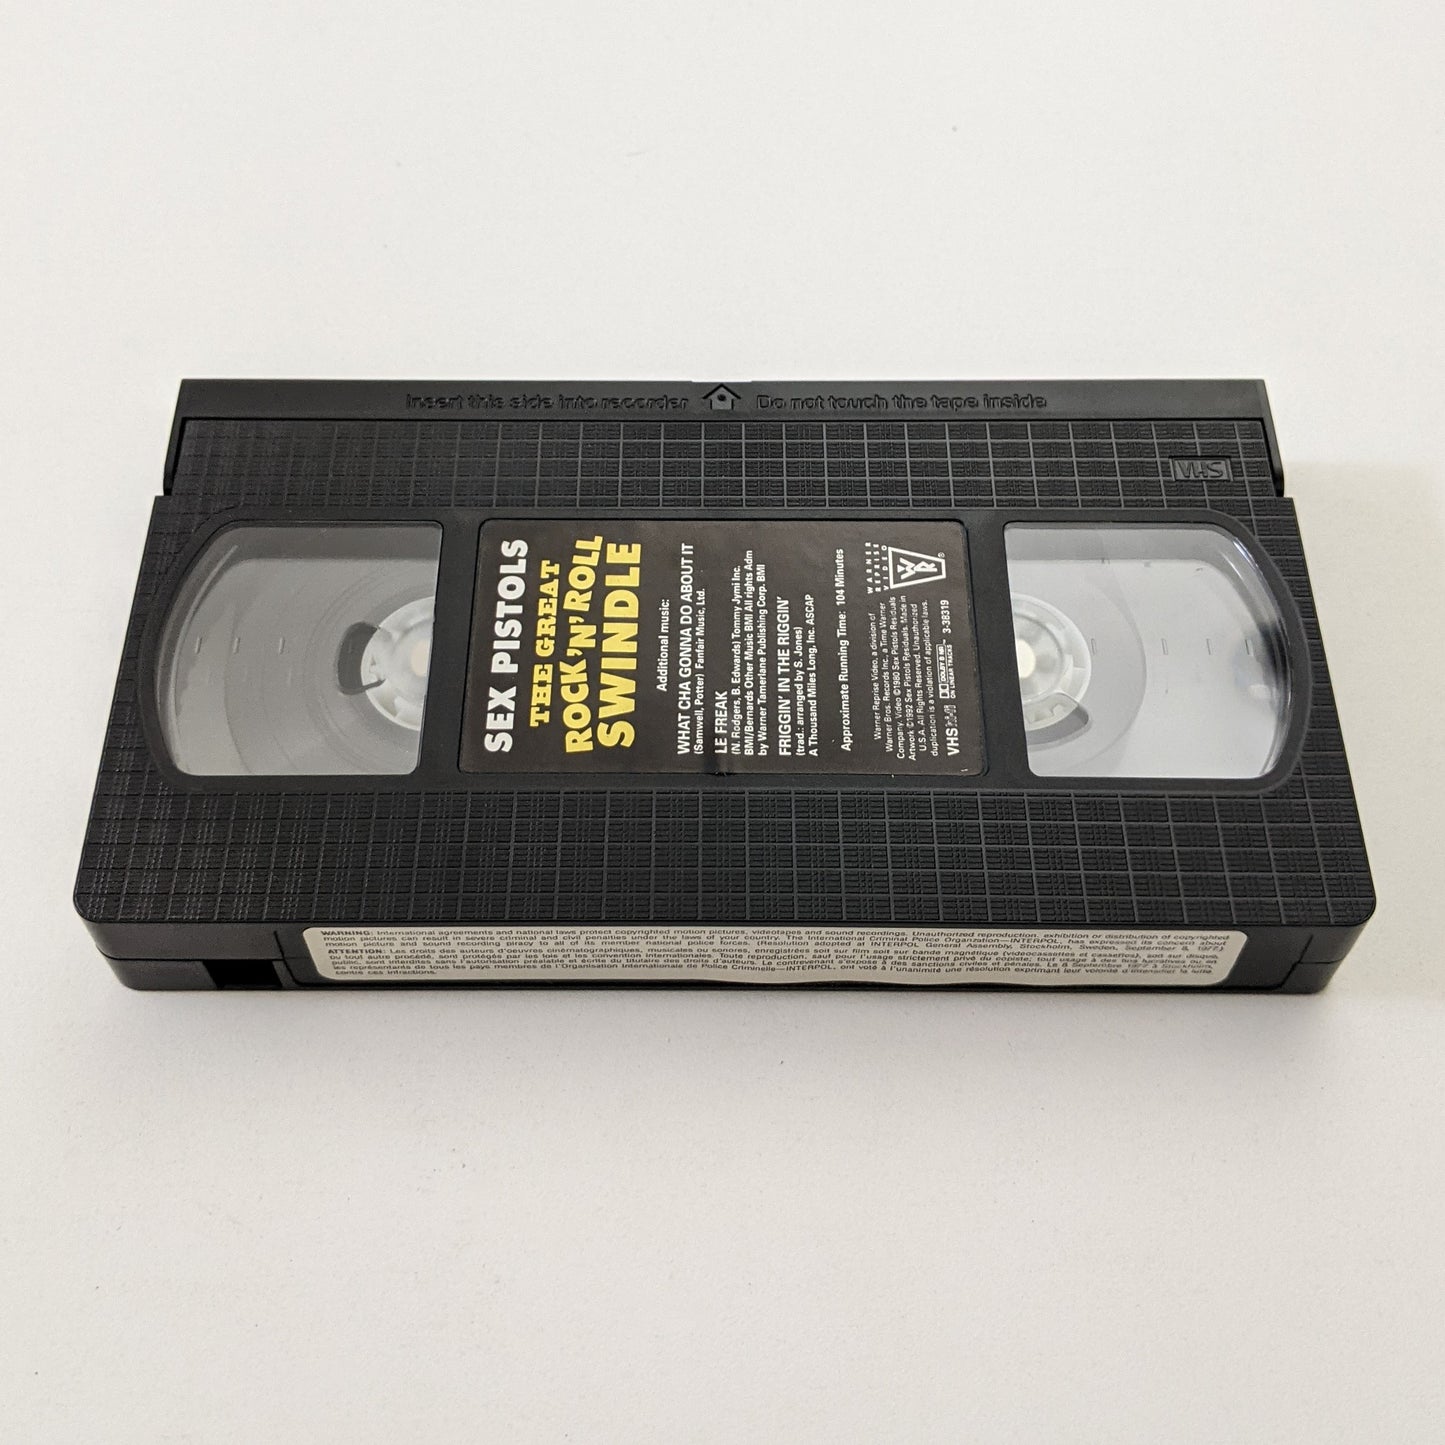 The Sex Pistols: The Great Rock 'N' Roll Swindle (1980) Music VHS